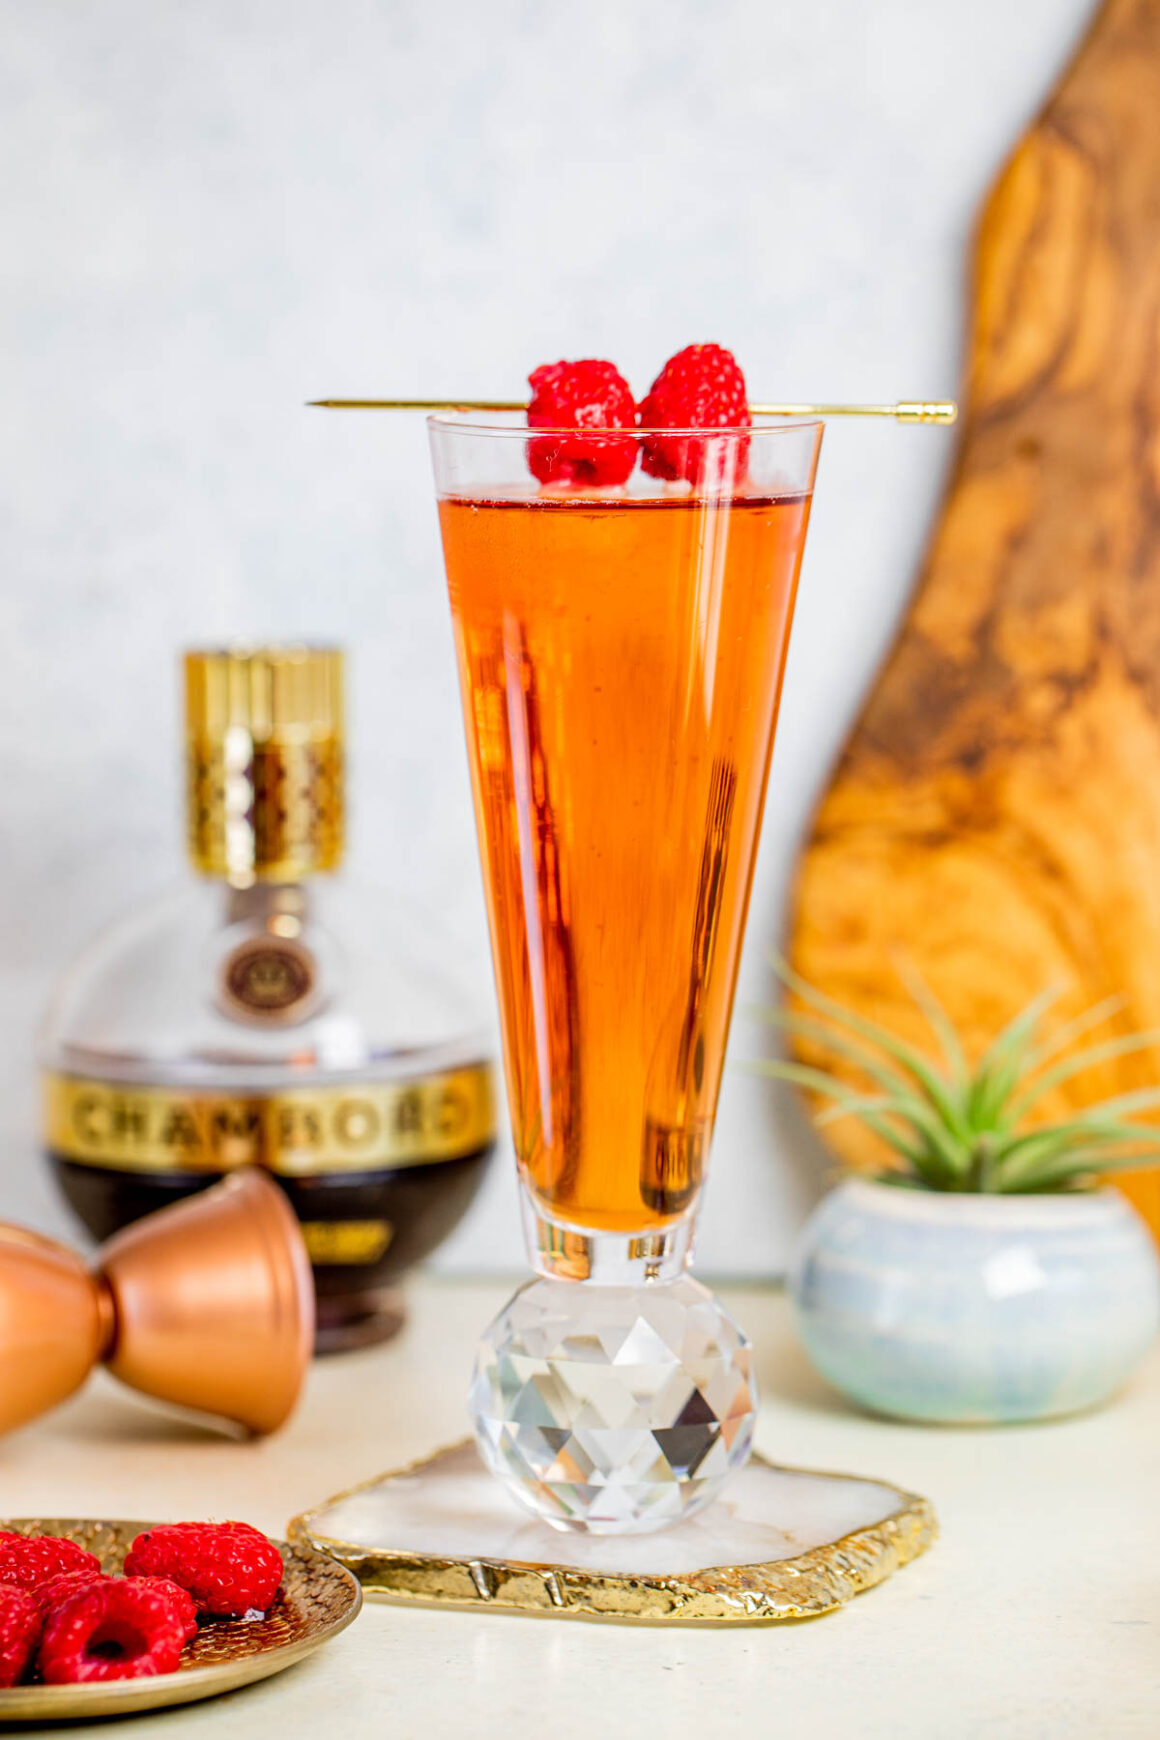 Originating in France, this beloved drink combines the luxurious effervescence of champagne with the rich and fruity flavors